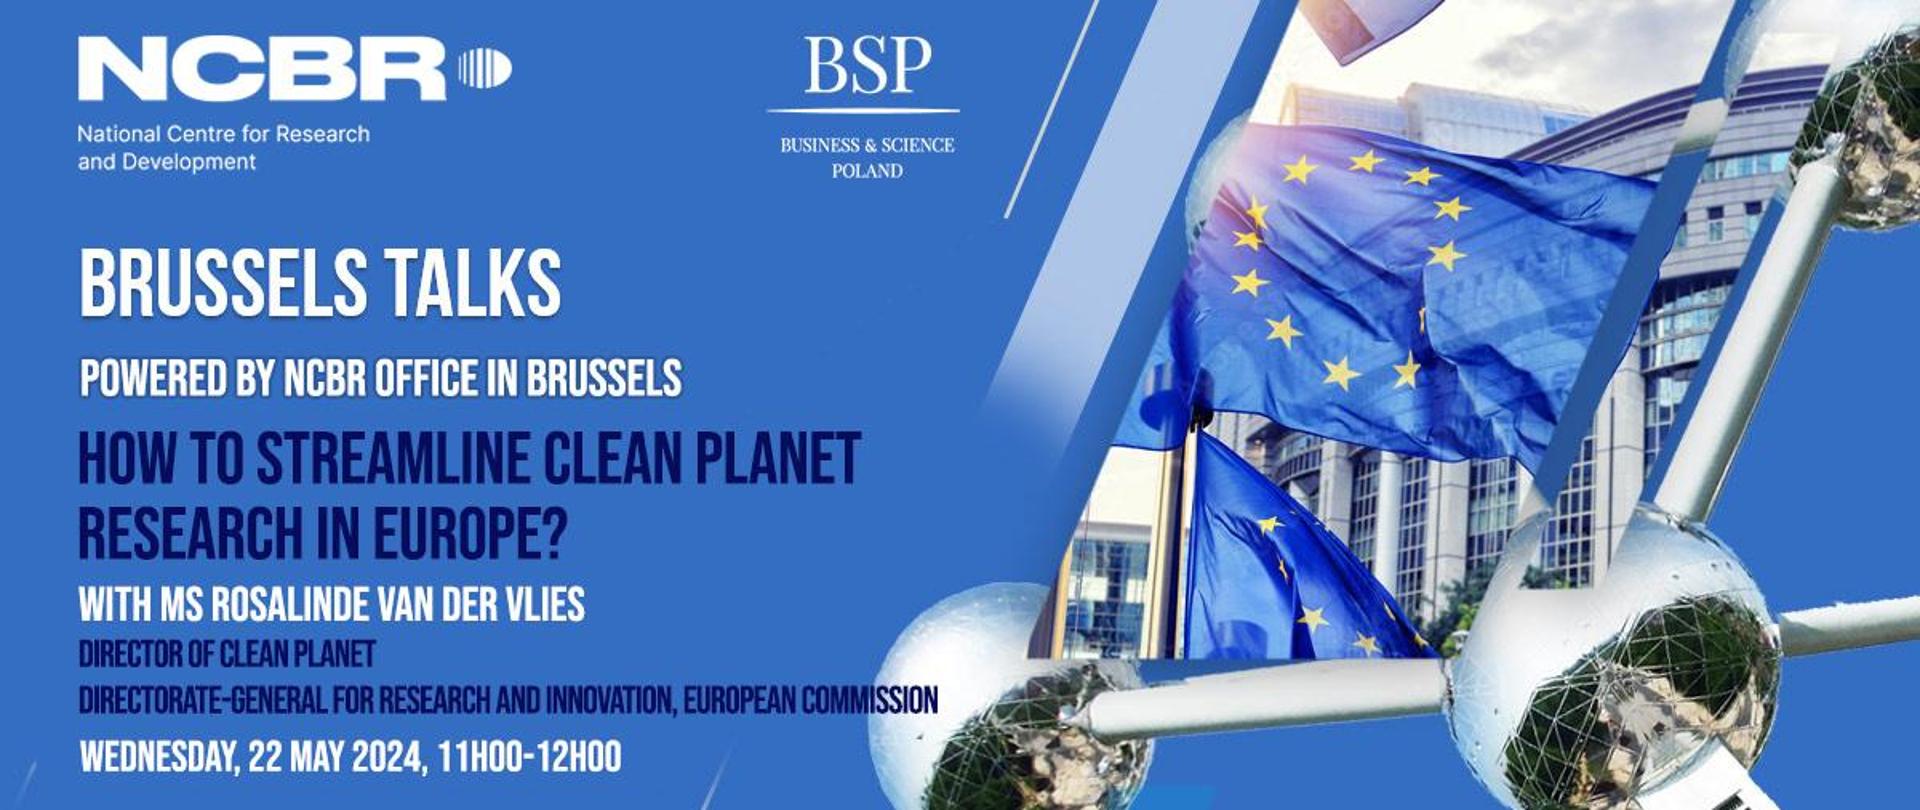 Brussels Talks: How to streamline clean planet research in Europe?